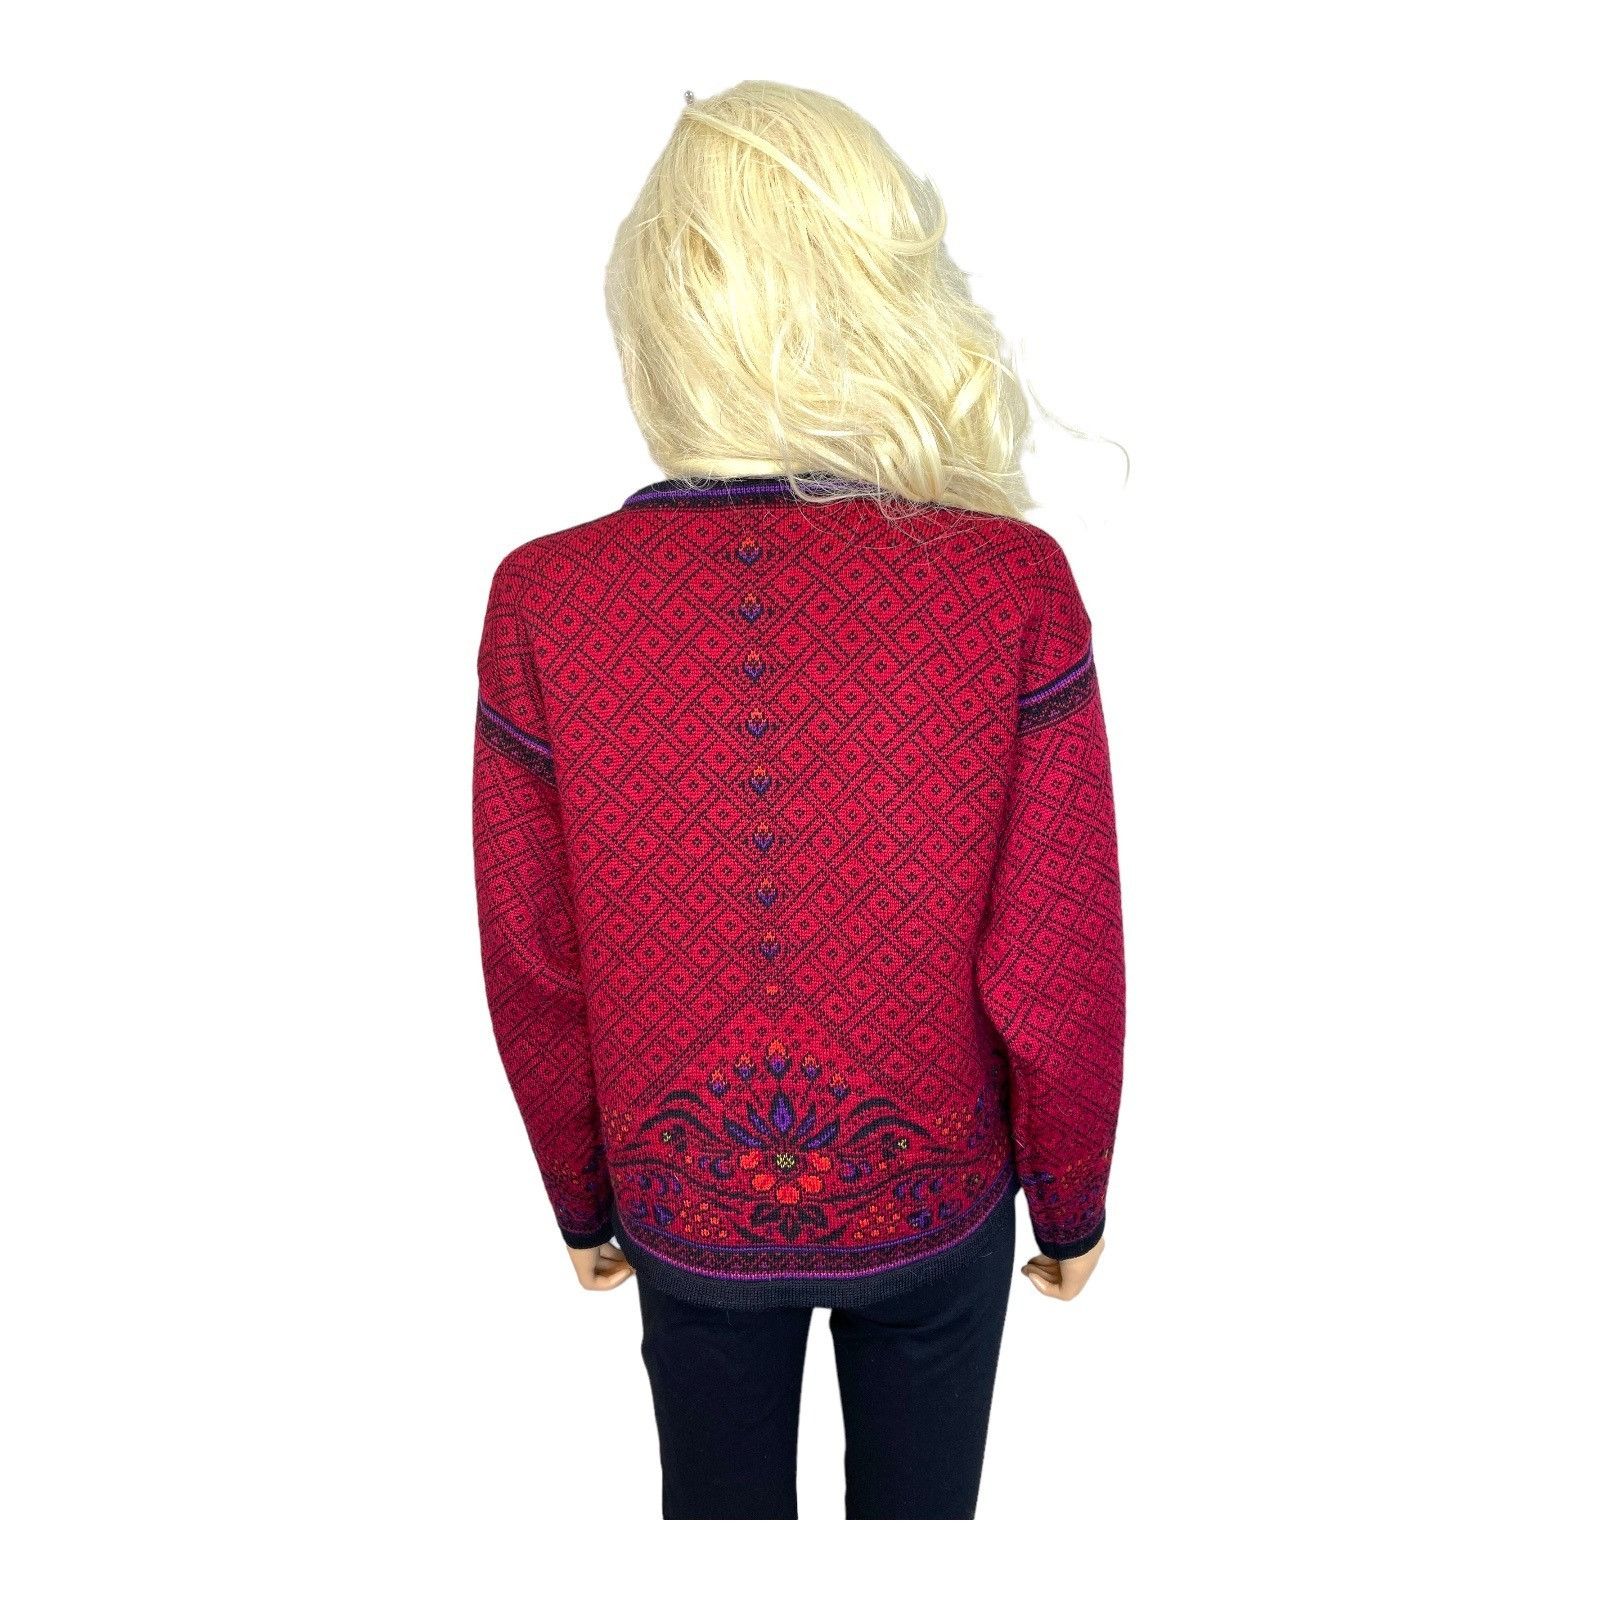 Dale Of Norway Dale of Norway Wool Cardigan Sweater Red Purple Pewter Butto Size M / US 6-8 / IT 42-44 - 4 Thumbnail